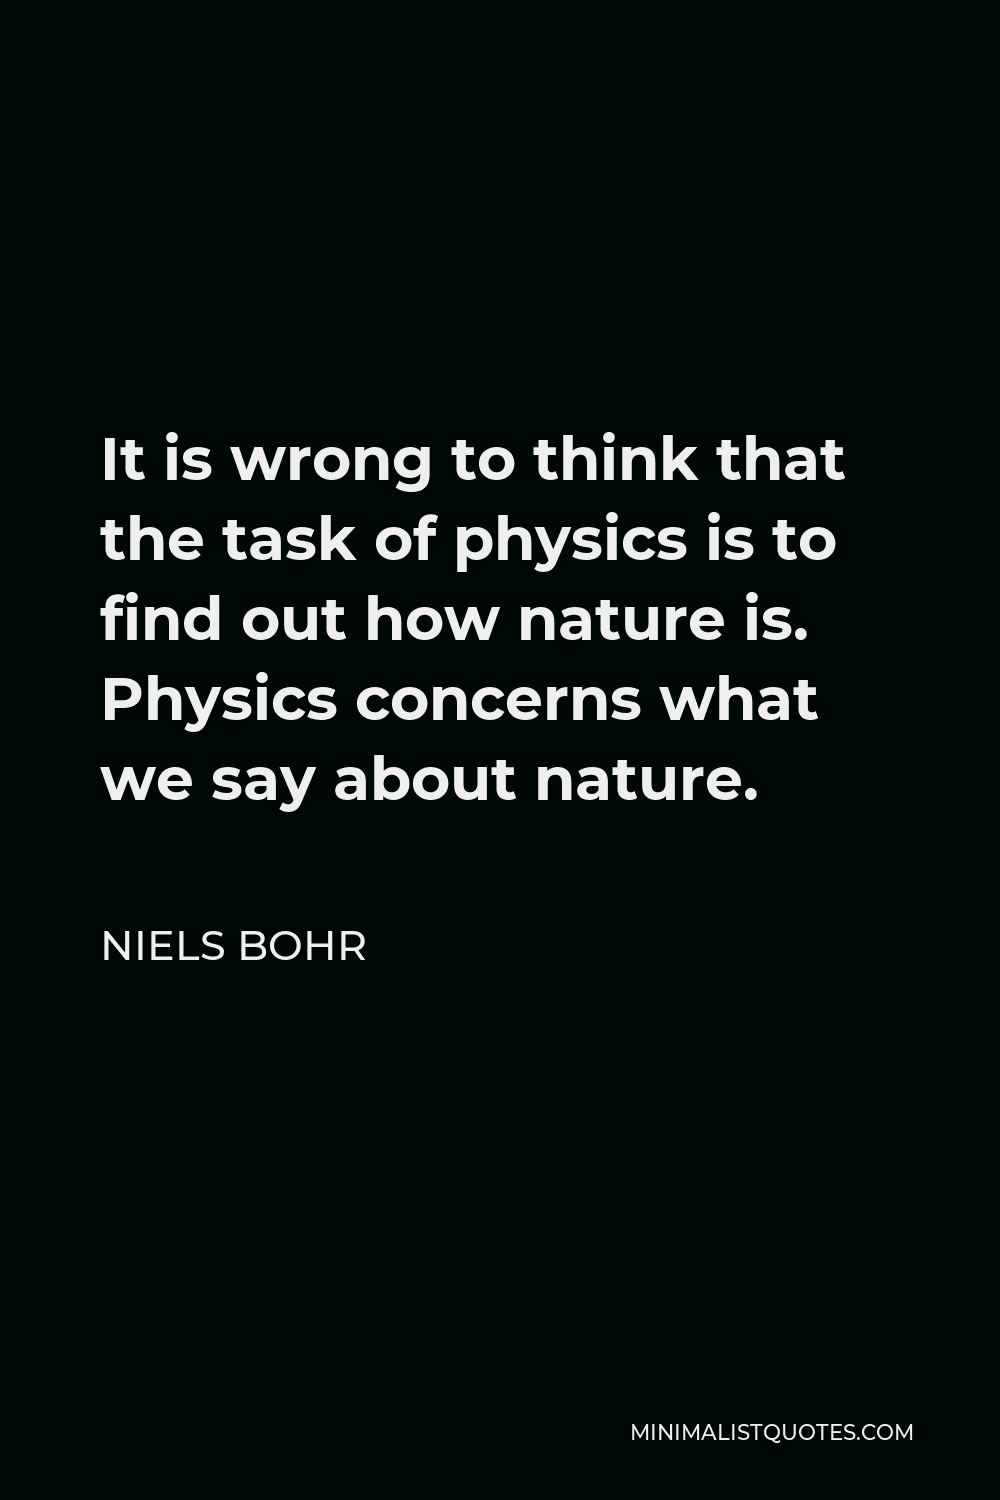 Niels Bohr Quote - It is wrong to think that the task of physics is to find out how nature is. Physics concerns what we say about nature.